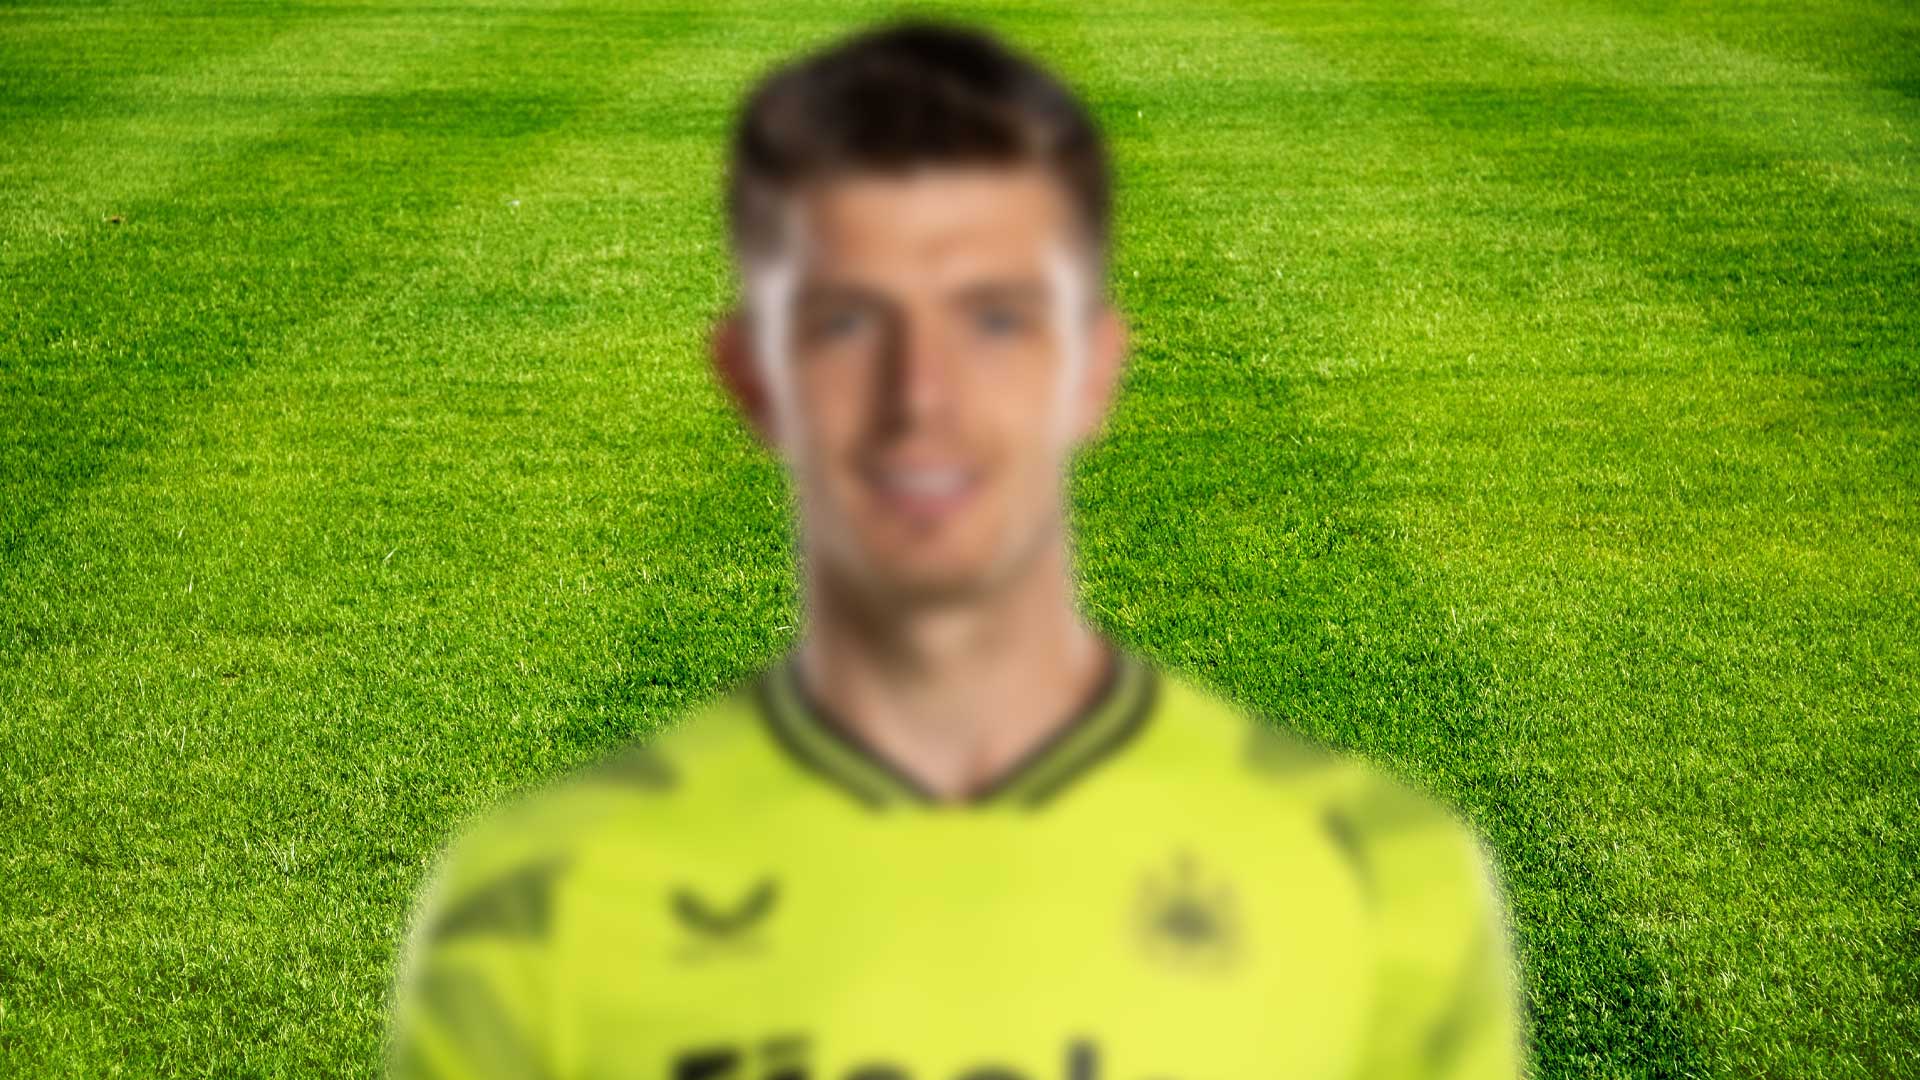 A blurred image of a Premier League football player